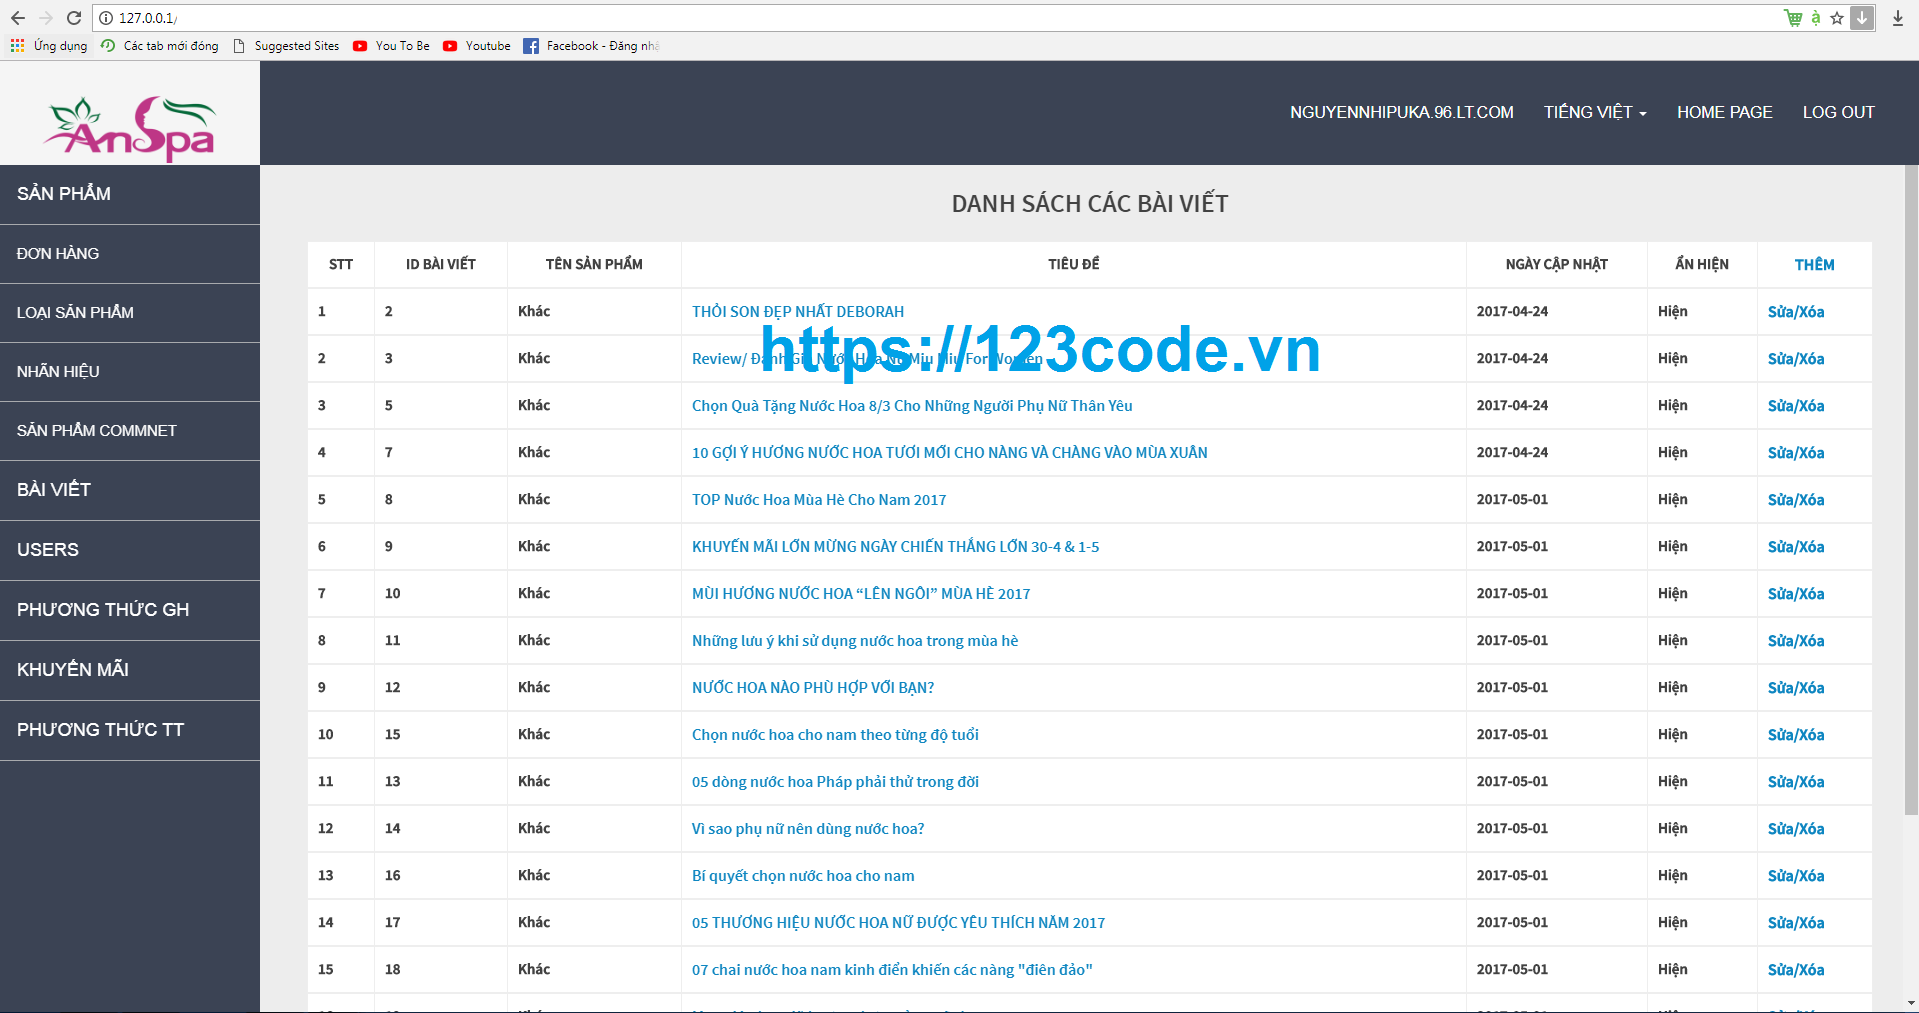 Share source code website bán hàng online php đầy đủ database